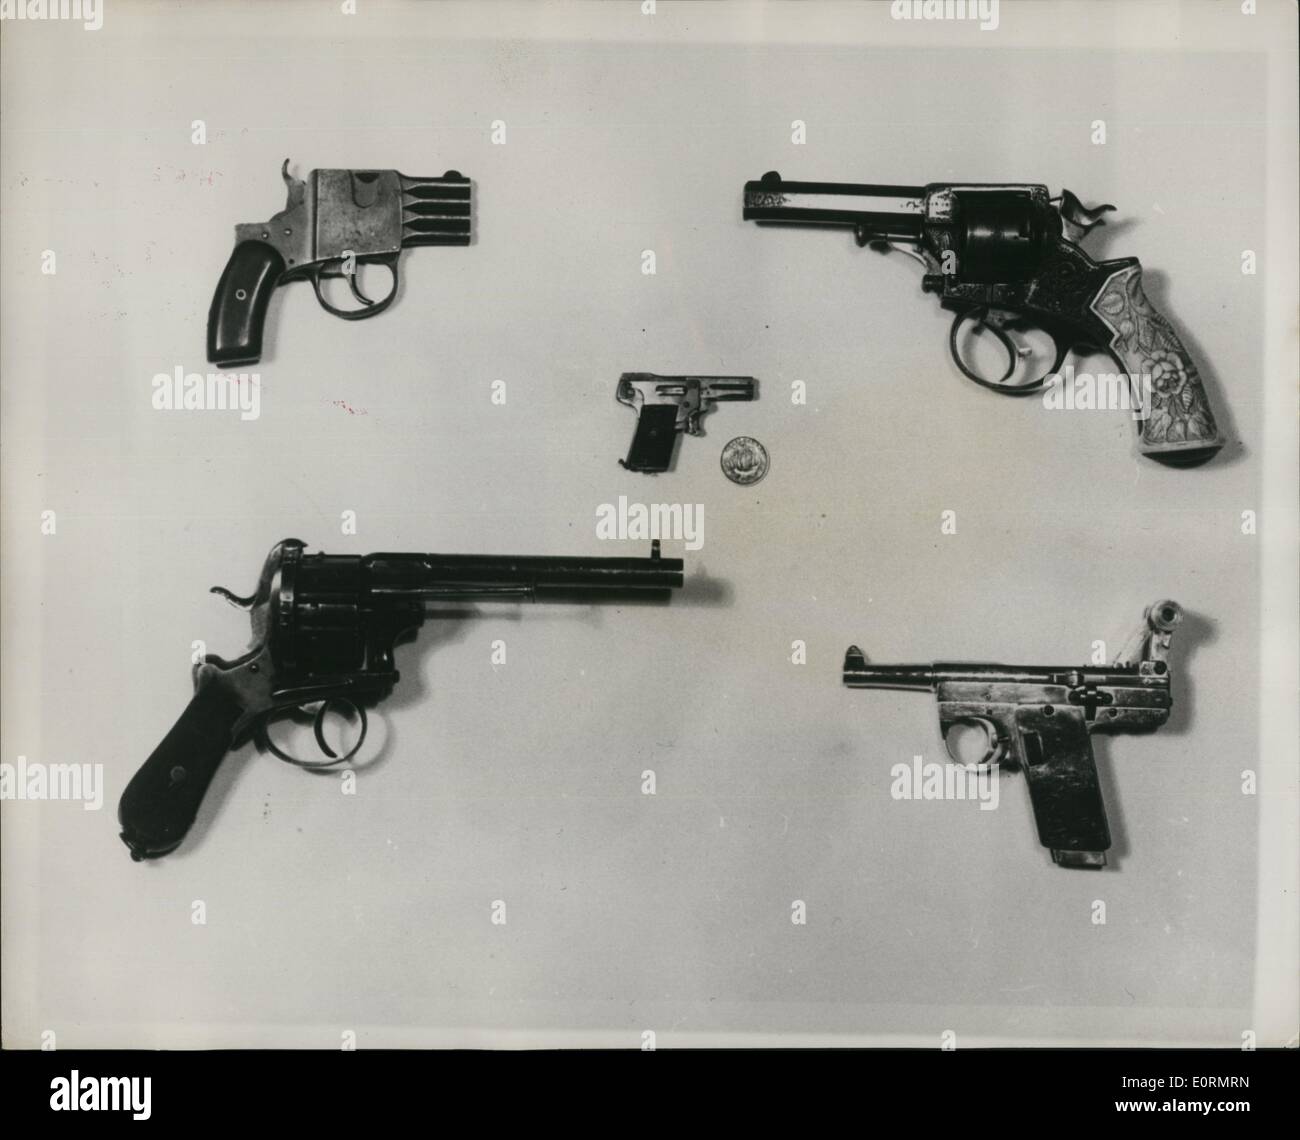 Jan 1, 1960 - Photo shows (Reading from left to right) Top. Bar Pistol (Regnum or Reform type). A common continental weapon; although appearing clumsy it is very flat and easy to conceal which probably accounted for its popularity. Tranter Revolver. A very fine specimen of a typical British ravolter of the late 19th and early 20th. centurtes. (Centre) : Kolibri Automatic Pistol. Smallest pistol of which the Museum is awar. A curiosity rather than a weapon, but still capable of being lethal. Shown with a halfpenny for scale Stock Photo